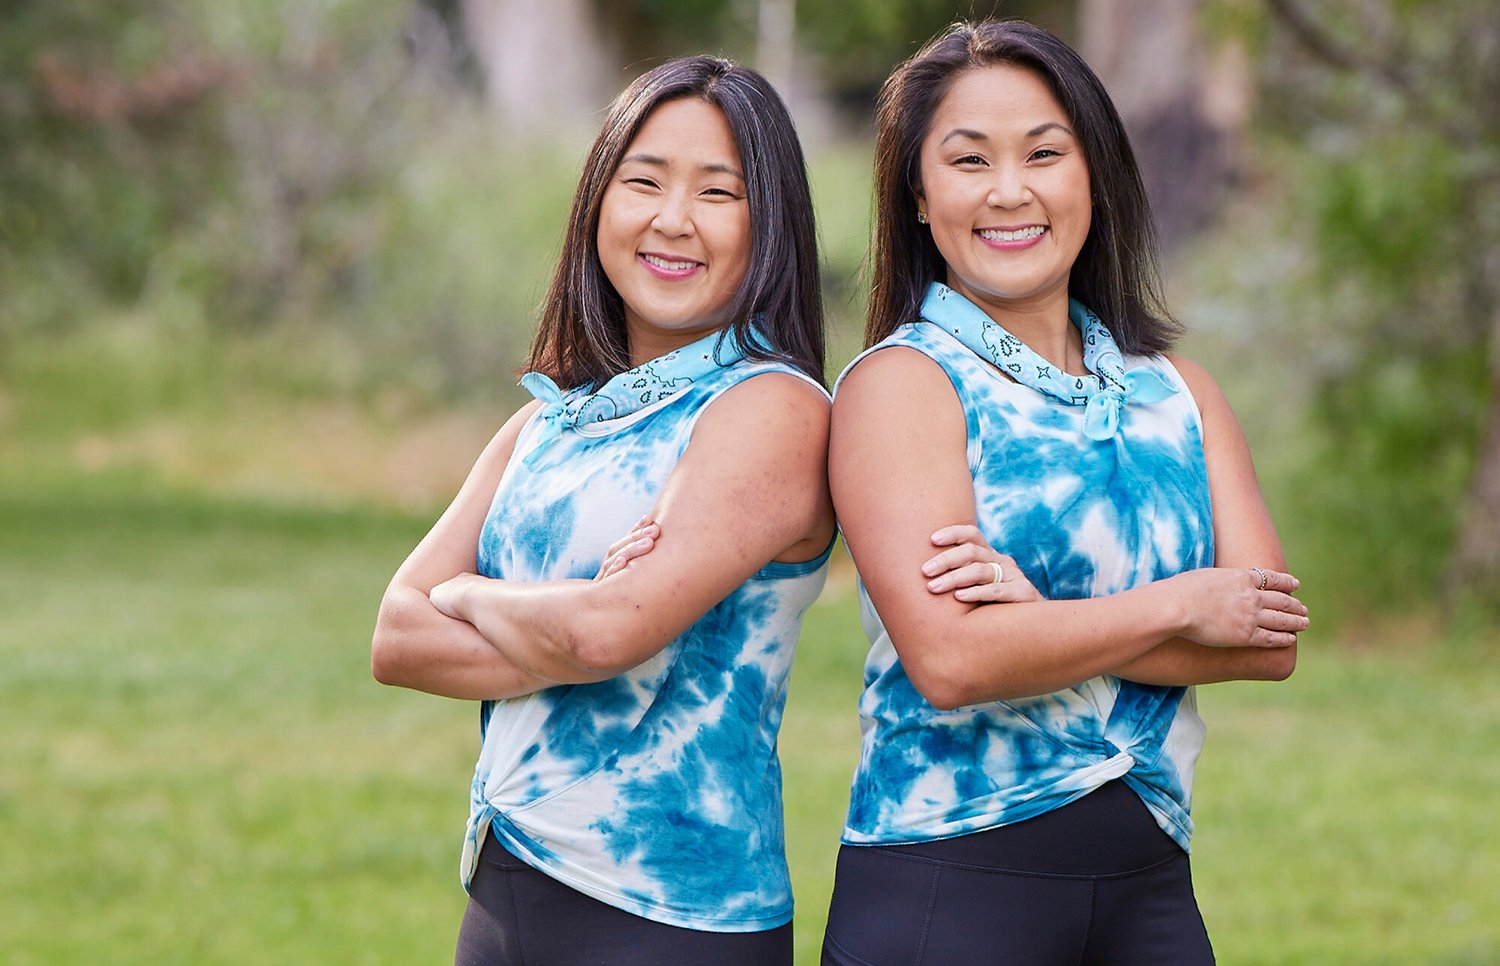 Twins Emily Bushnell and Molly Sinert on The Amazing Race Season 34